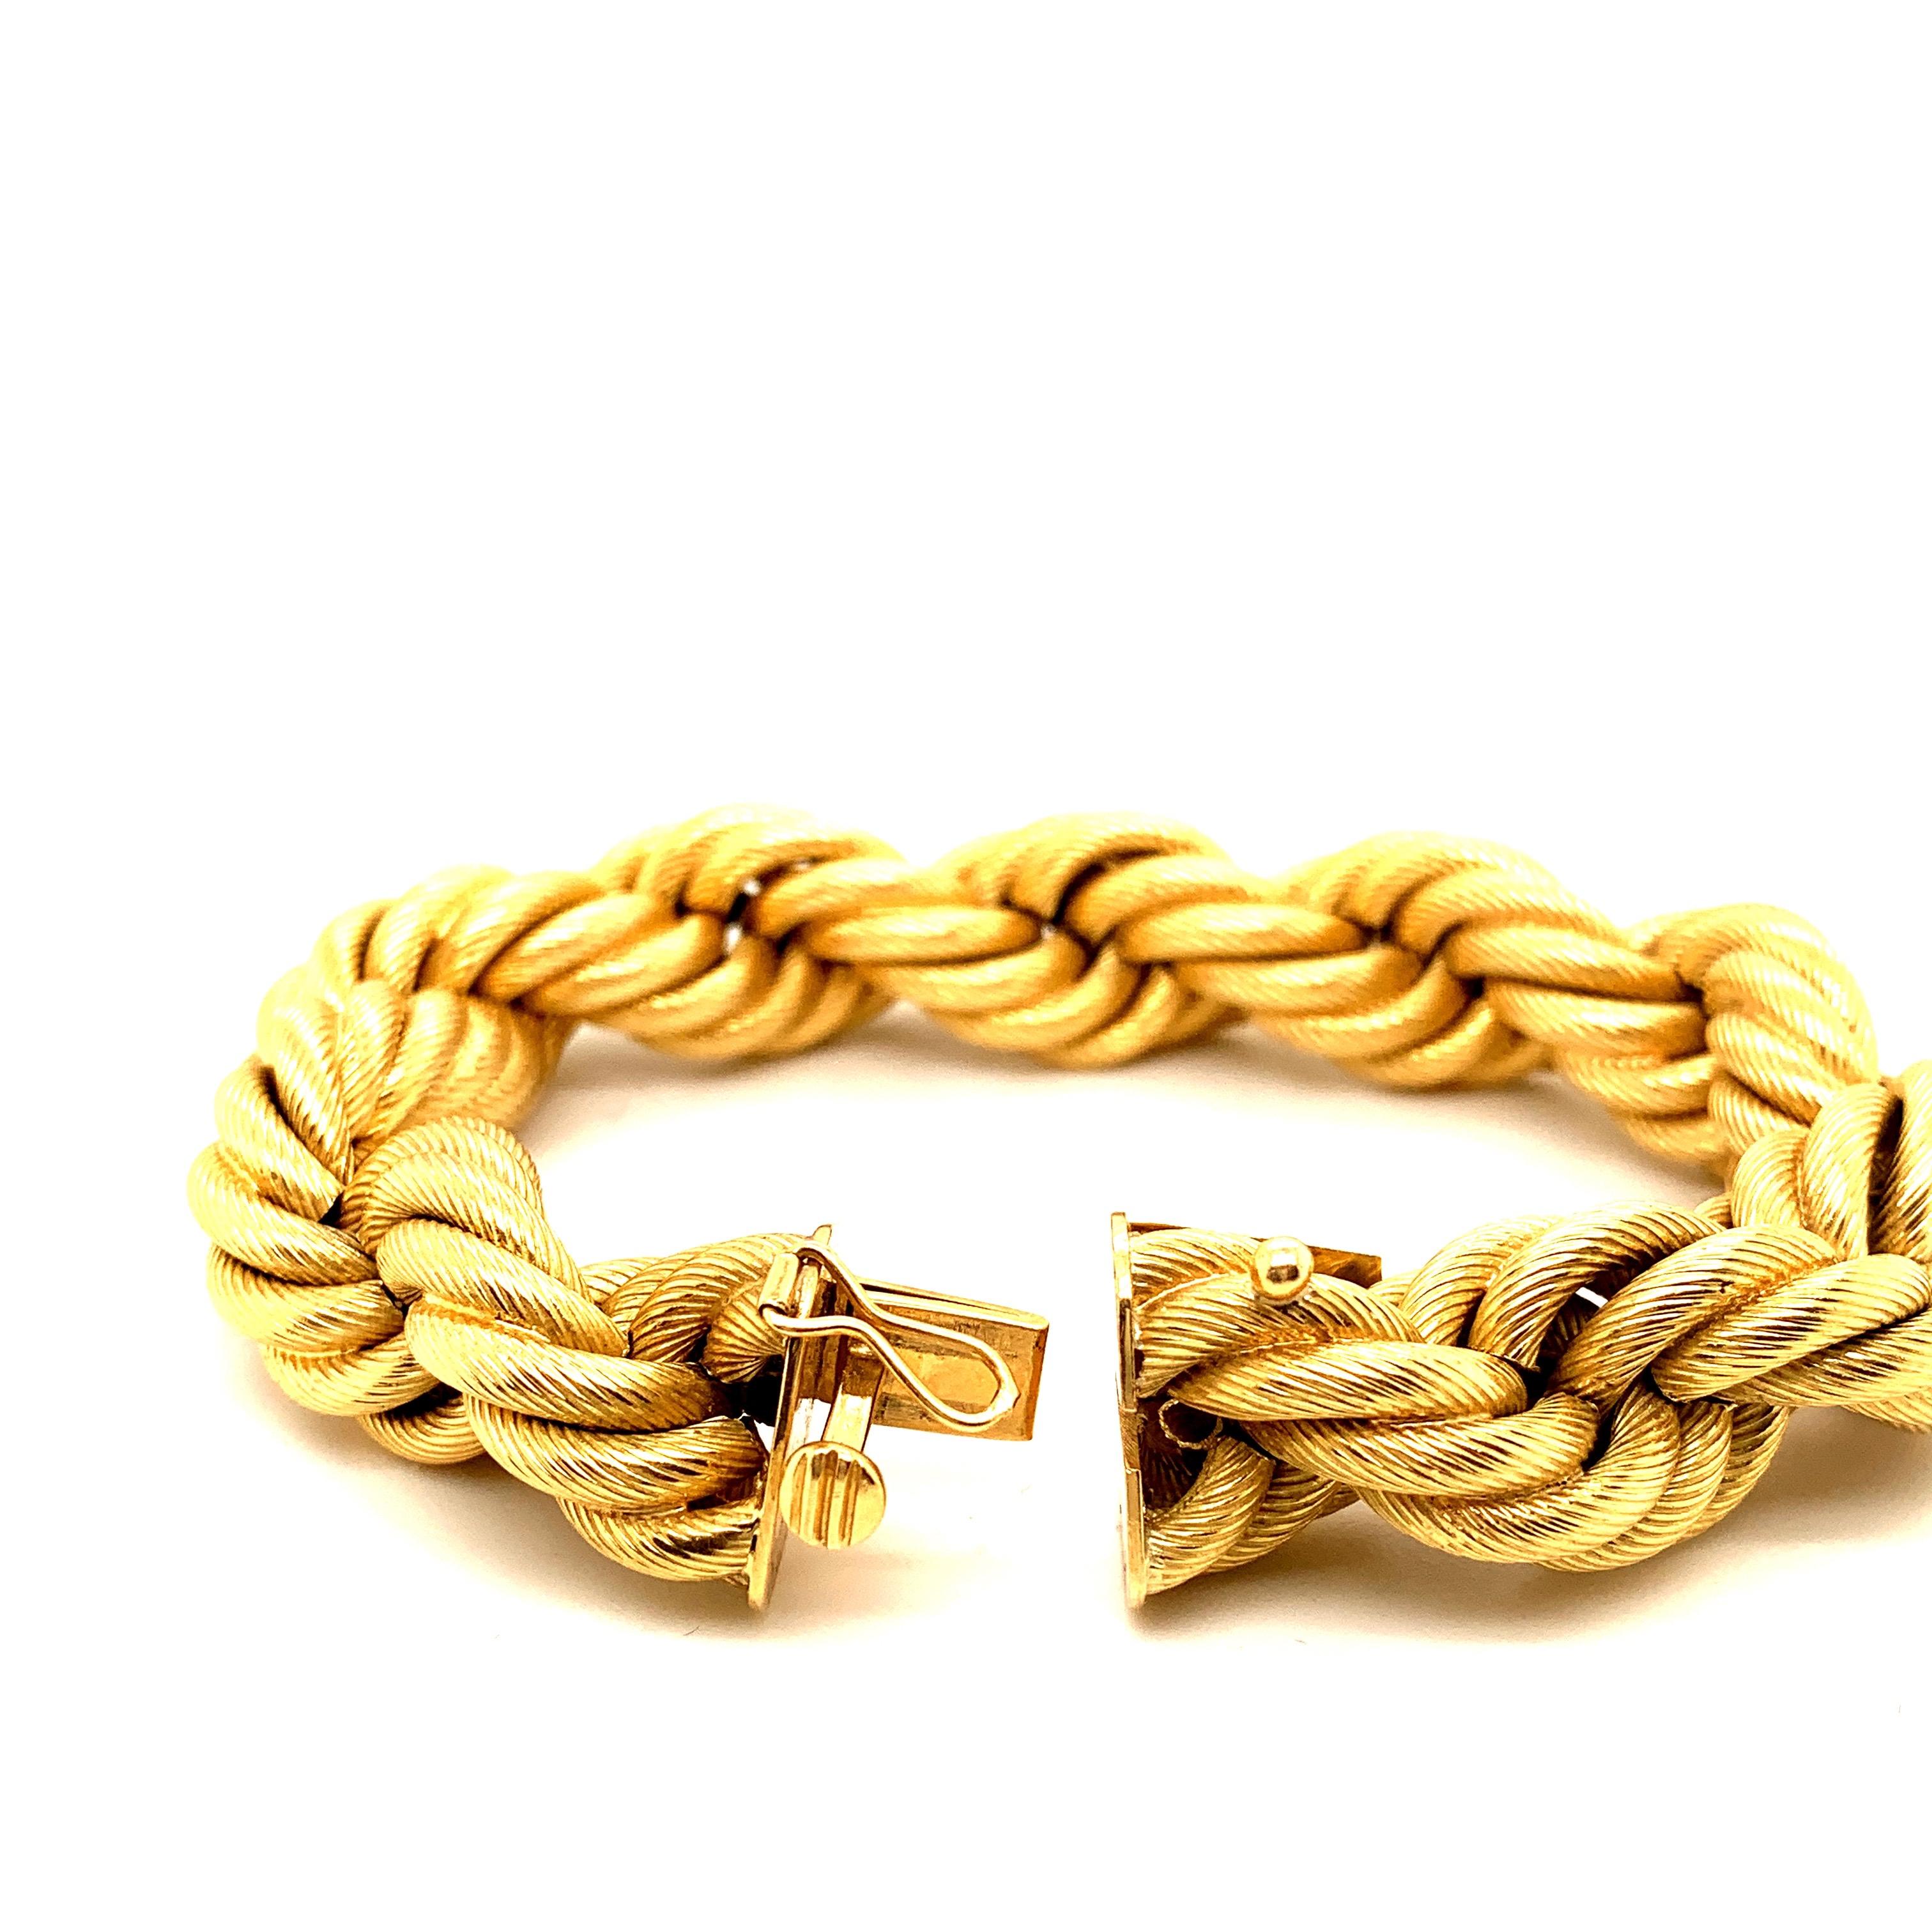 Beautiful Italian twisted ”Rope” Gold bracelet.
This bold bracelet Weighing over 66 grams of 18k Gold is an attractive statement piece. 
Measuring 8 inches in length.
What’s old is new again.